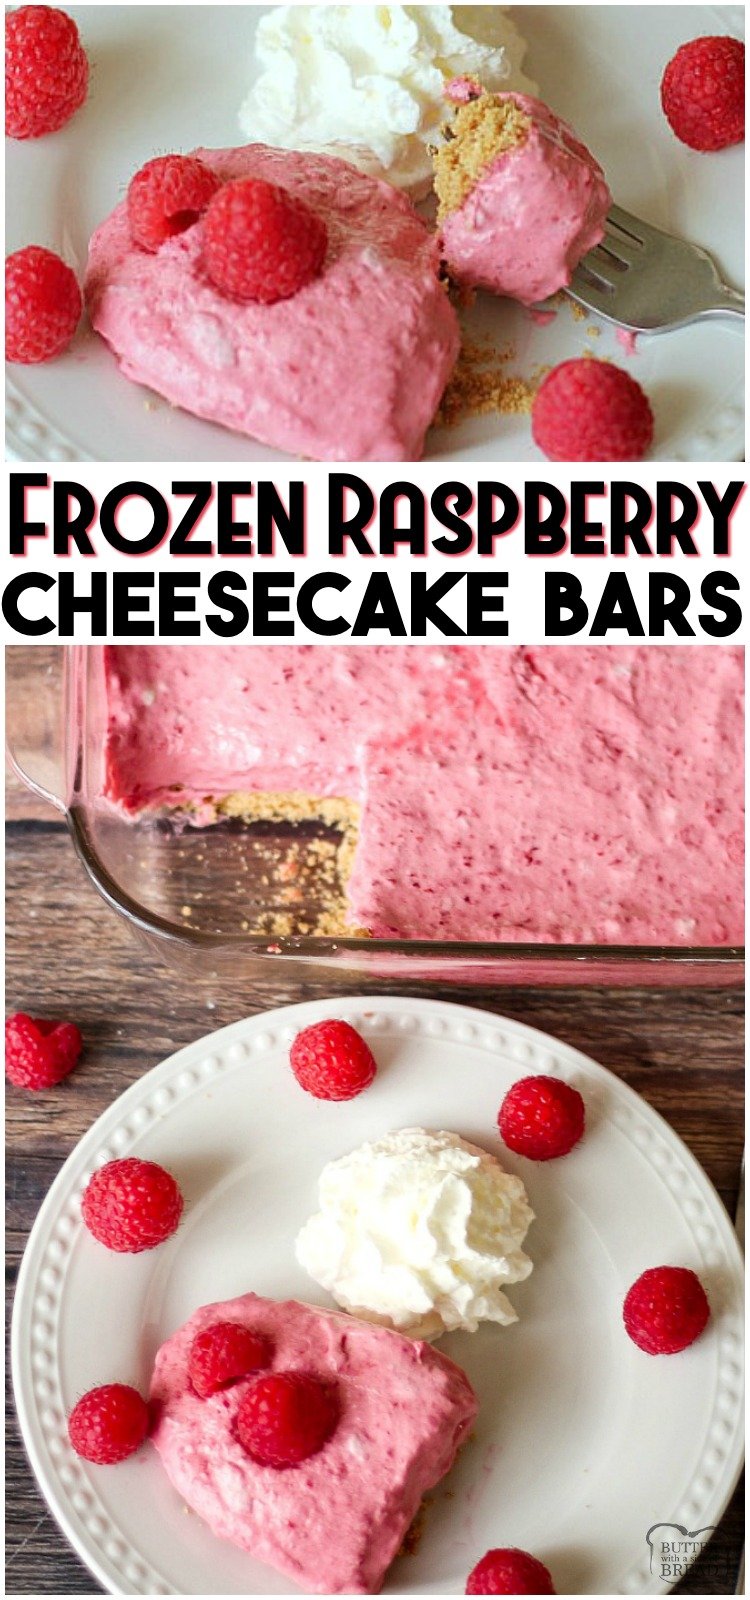 Frozen Raspberry Cheesecake Bars are a simple dessert made by combining cheesecake & raspberries. Sweet, creamy and delicious no-bake raspberry cheesecake recipe can be made ahead and comes together quick. #cheesecake #frozen #raspberry #dessert #raspberries #recipe from BUTTER WITH A SIDE OF BREAD